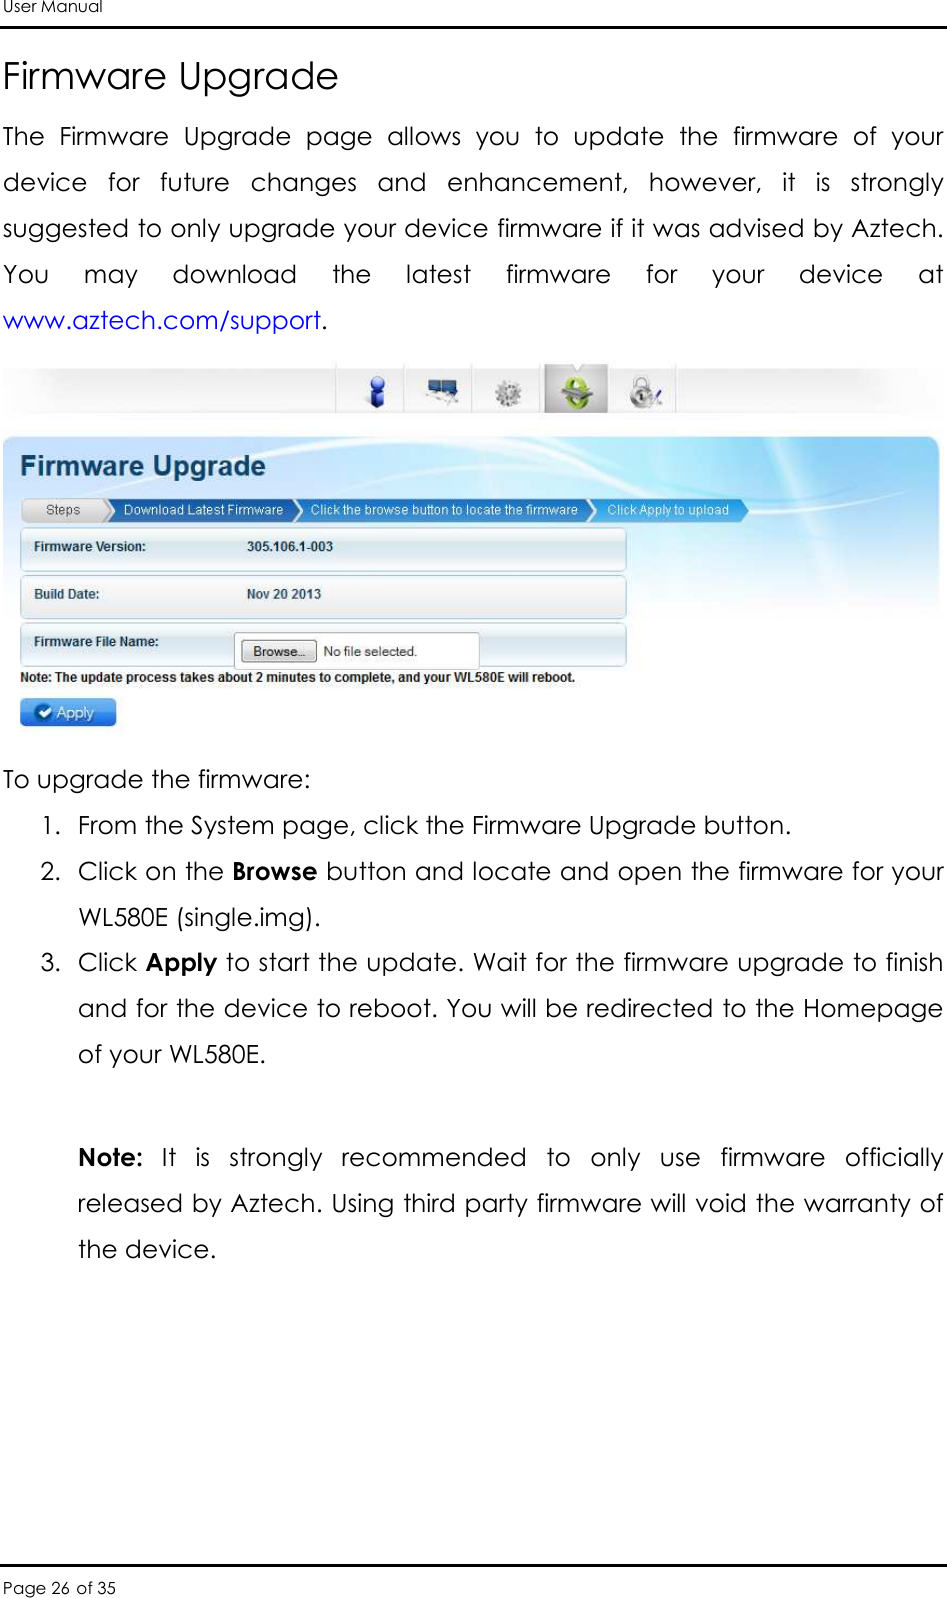 User Manual Page 26 of 35 Firmware Upgrade The  Firmware  Upgrade  page  allows  you  to  update  the  firmware  of  your device  for  future  changes  and  enhancement,  however,  it  is  strongly suggested to only upgrade your device firmware if it was advised by Aztech. You  may  download  the  latest  firmware  for  your  device  at www.aztech.com/support.   To upgrade the firmware: 1. From the System page, click the Firmware Upgrade button.  2. Click on the Browse button and locate and open the firmware for your WL580E (single.img).  3. Click Apply to start the update. Wait for the firmware upgrade to finish and for the device to reboot. You will be redirected to the Homepage of your WL580E.   Note:  It  is  strongly  recommended  to  only  use  firmware  officially released by Aztech. Using third party firmware will void the warranty of the device.  